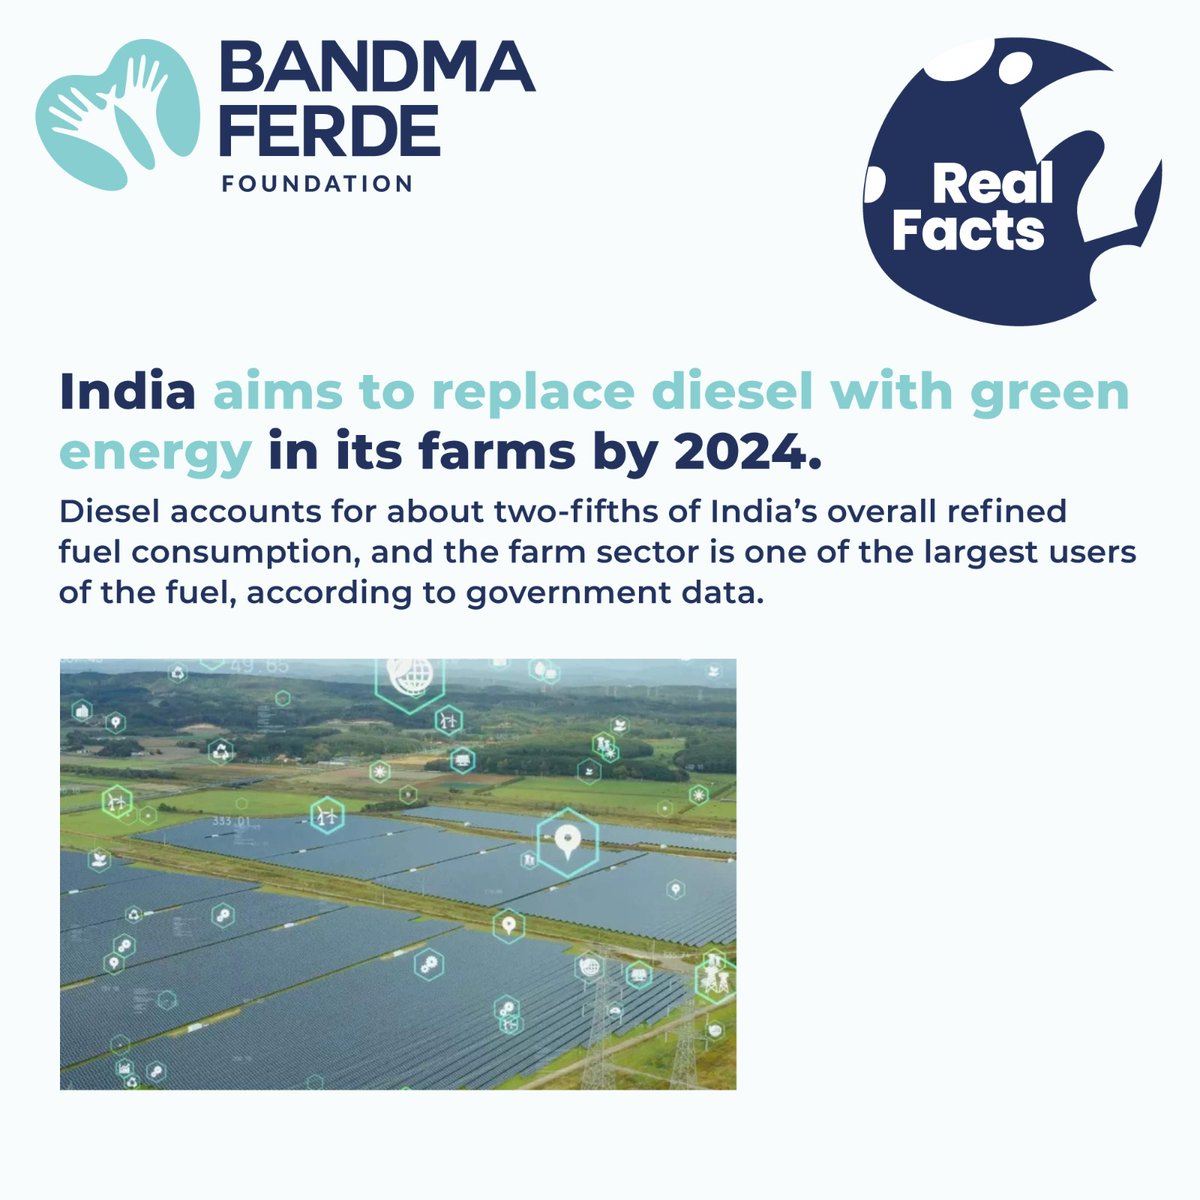 𝐑𝐞𝐚𝐥 𝐅𝐚𝐜𝐭: India aims to replace diesel with green energy in its farms by 2024. For more information visit the link: linktr.ee/Bandmaferdefou… #Bandmaferdefoundation #Bandmaferde #realfacts #India #factsmatter #nonprofitorganizationindelhi #NGOIndia #greenindia